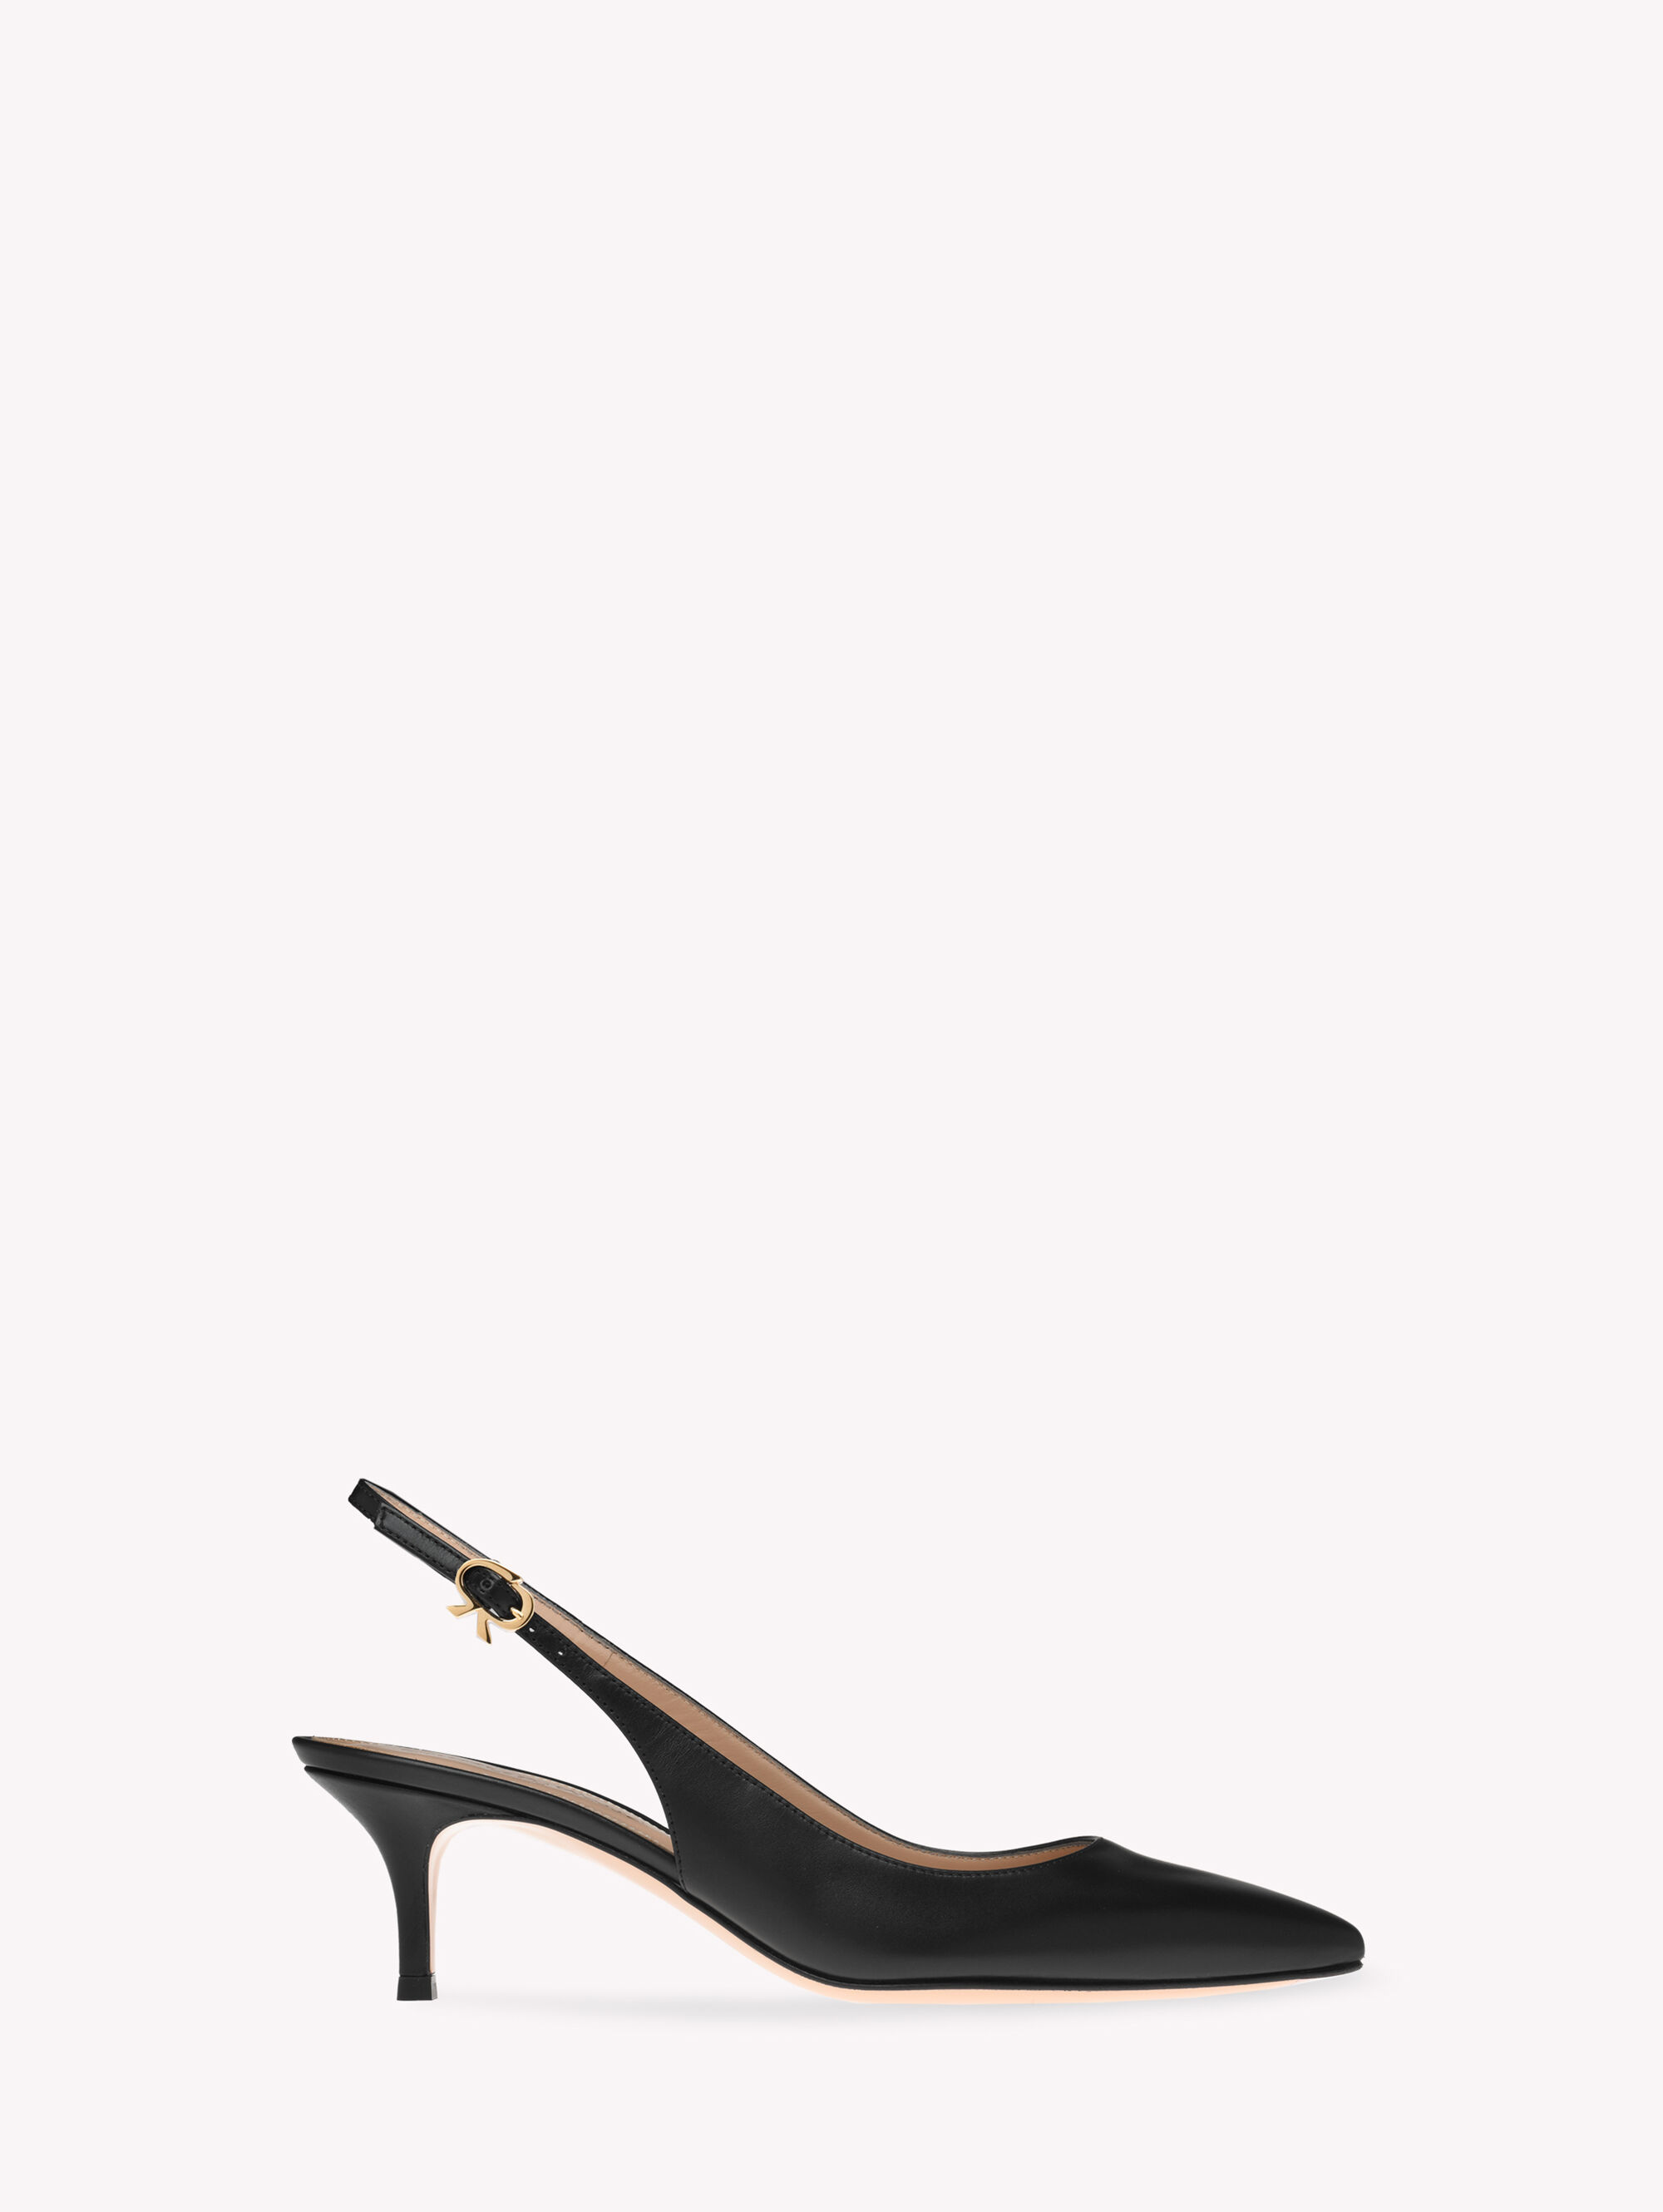 Find amazing products in パンプス today | Gianvito Rossi Japan